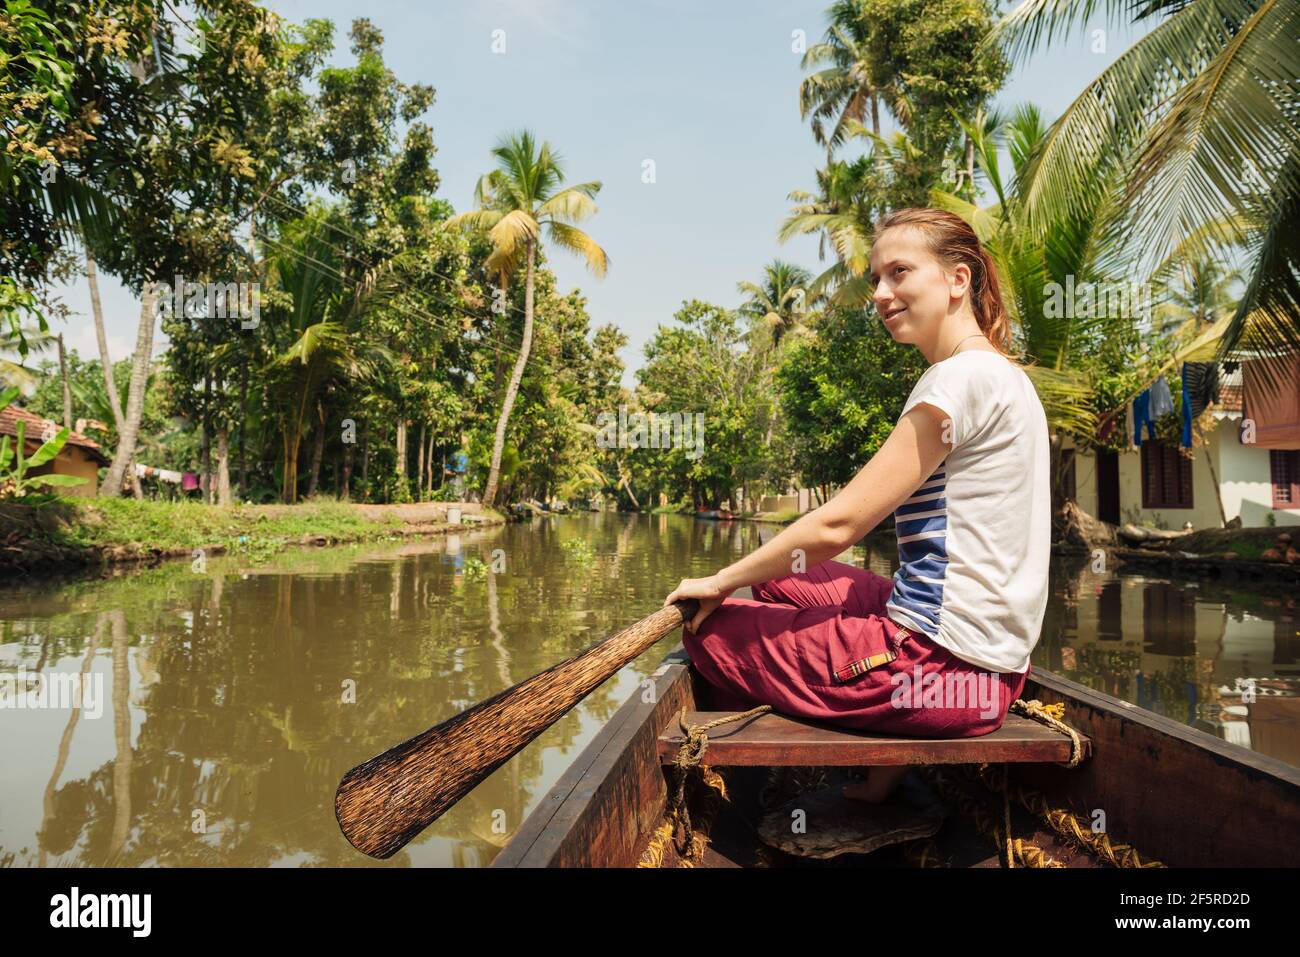 Tourist relaxing on Alleppey backwaters and enjoying beautiful view landscape. Woman sitting on the boat at meditation pose. Kerala, India Stock Photo